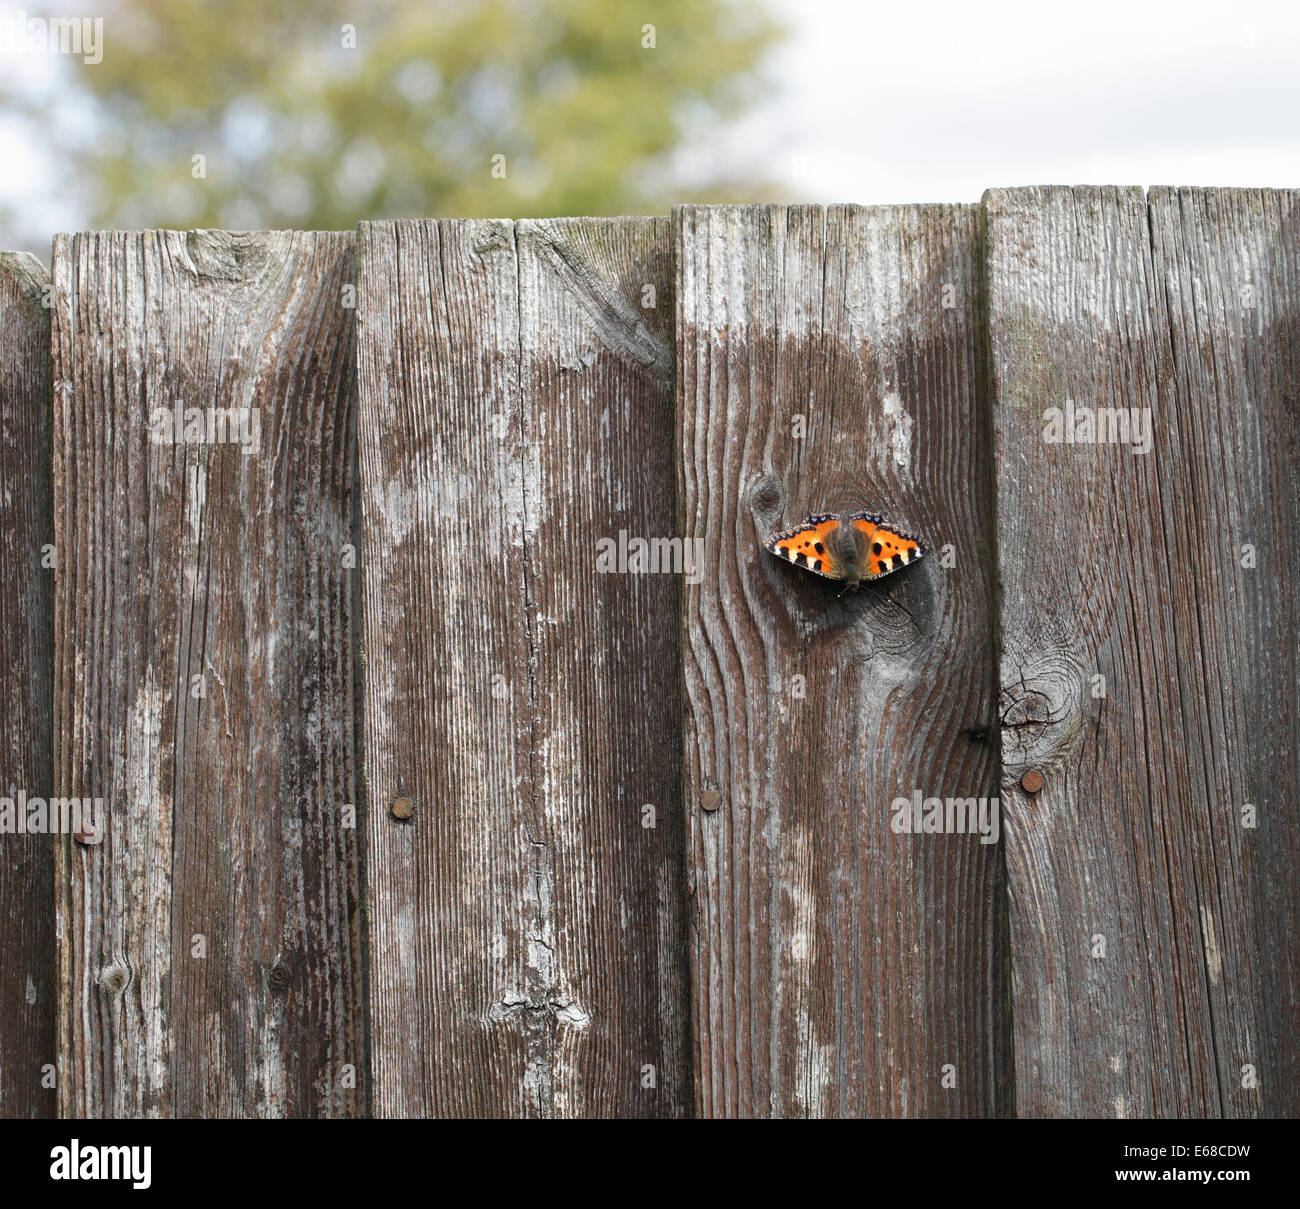 Small Tortoiseshell butterfly Aglais urticae on wooden fence Stock Photo